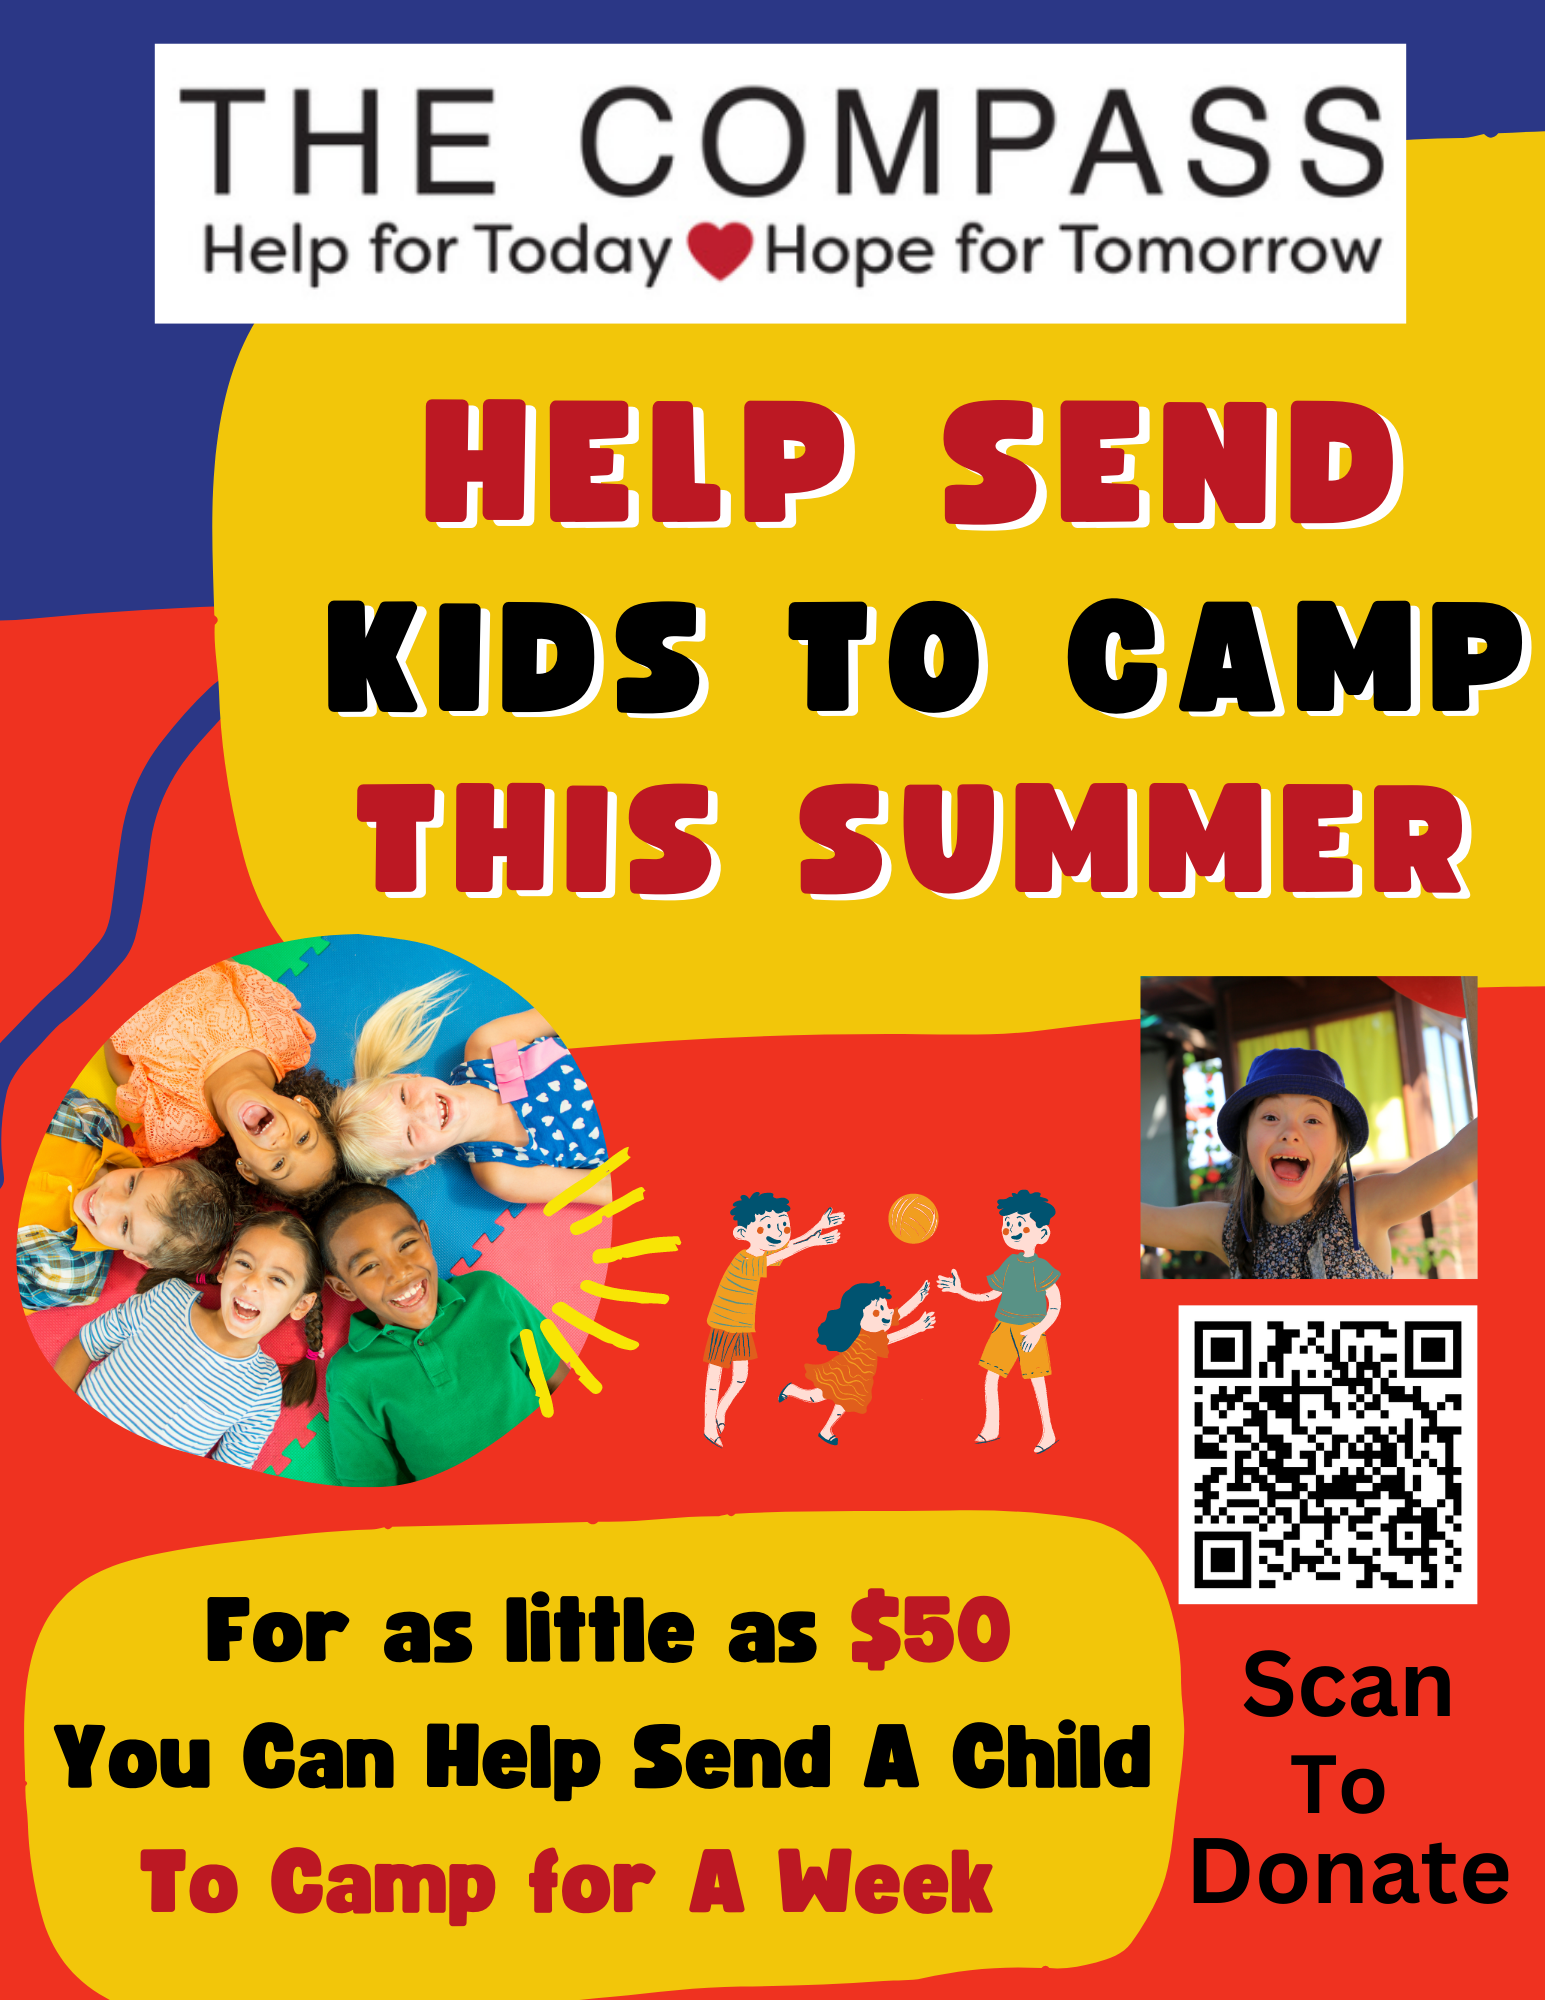 Help send kids to camp this summer